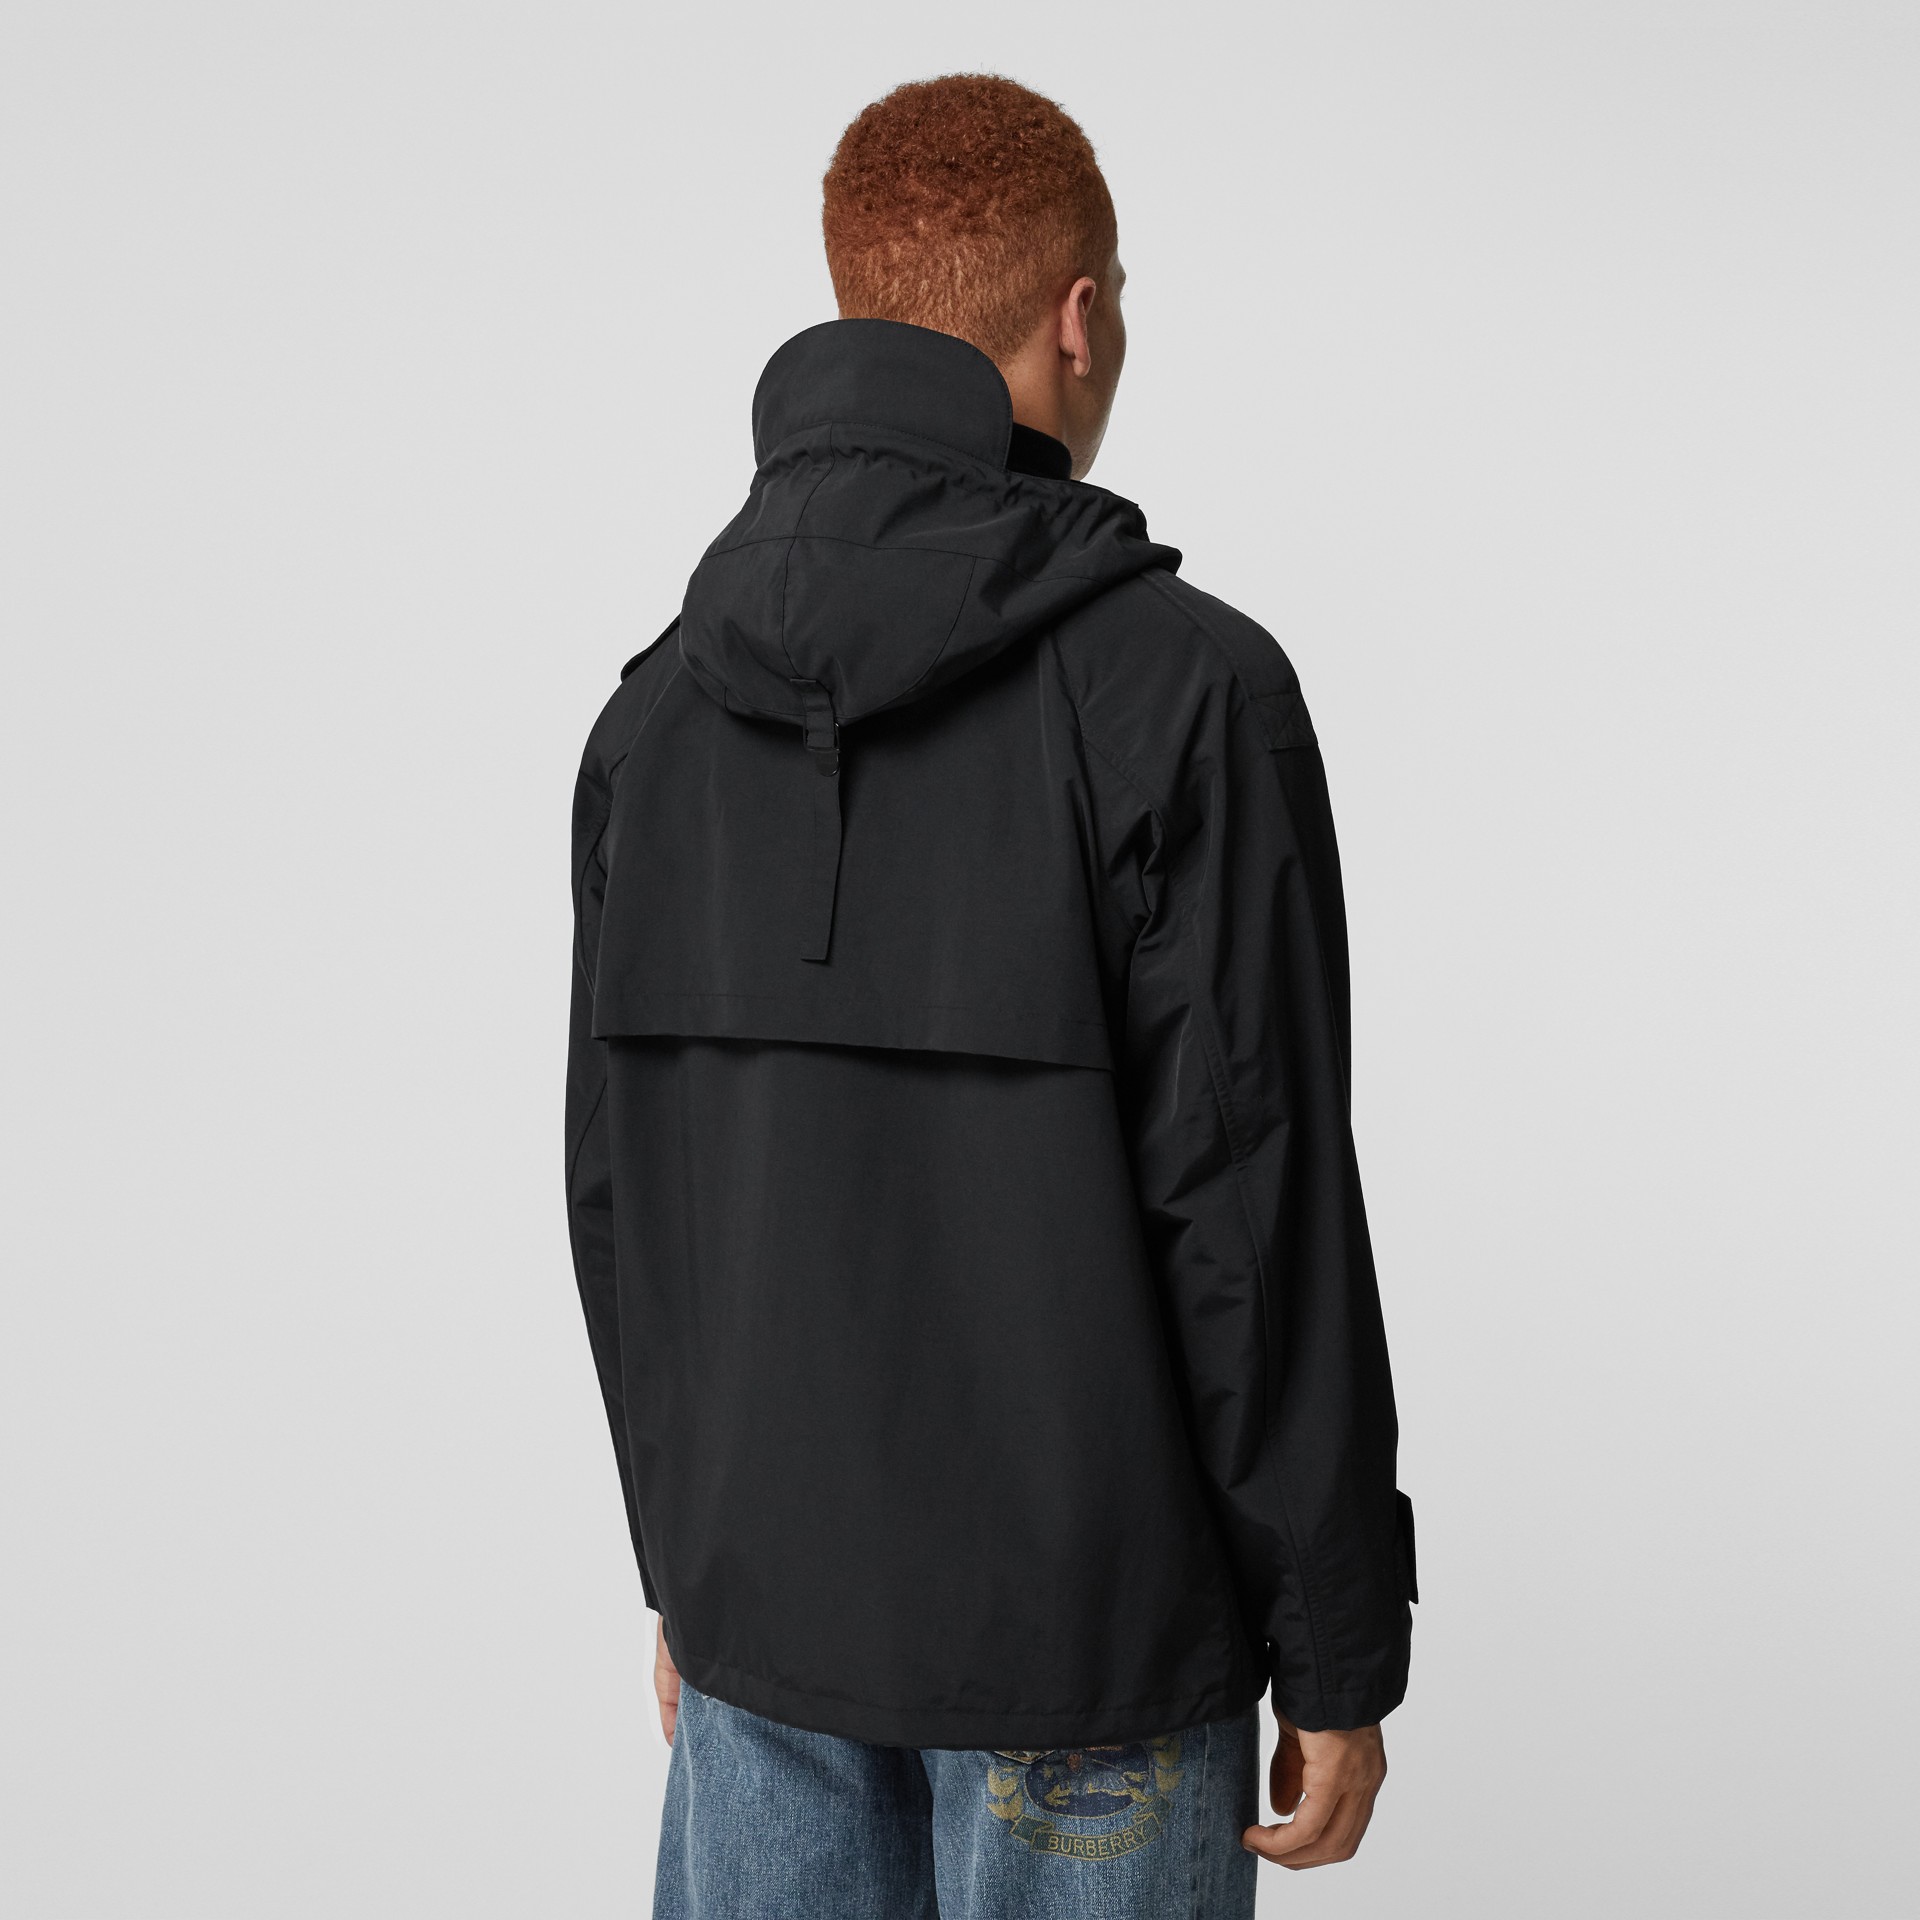 Bungee Cord Detail Hooded Parka in Black - Men | Burberry United States